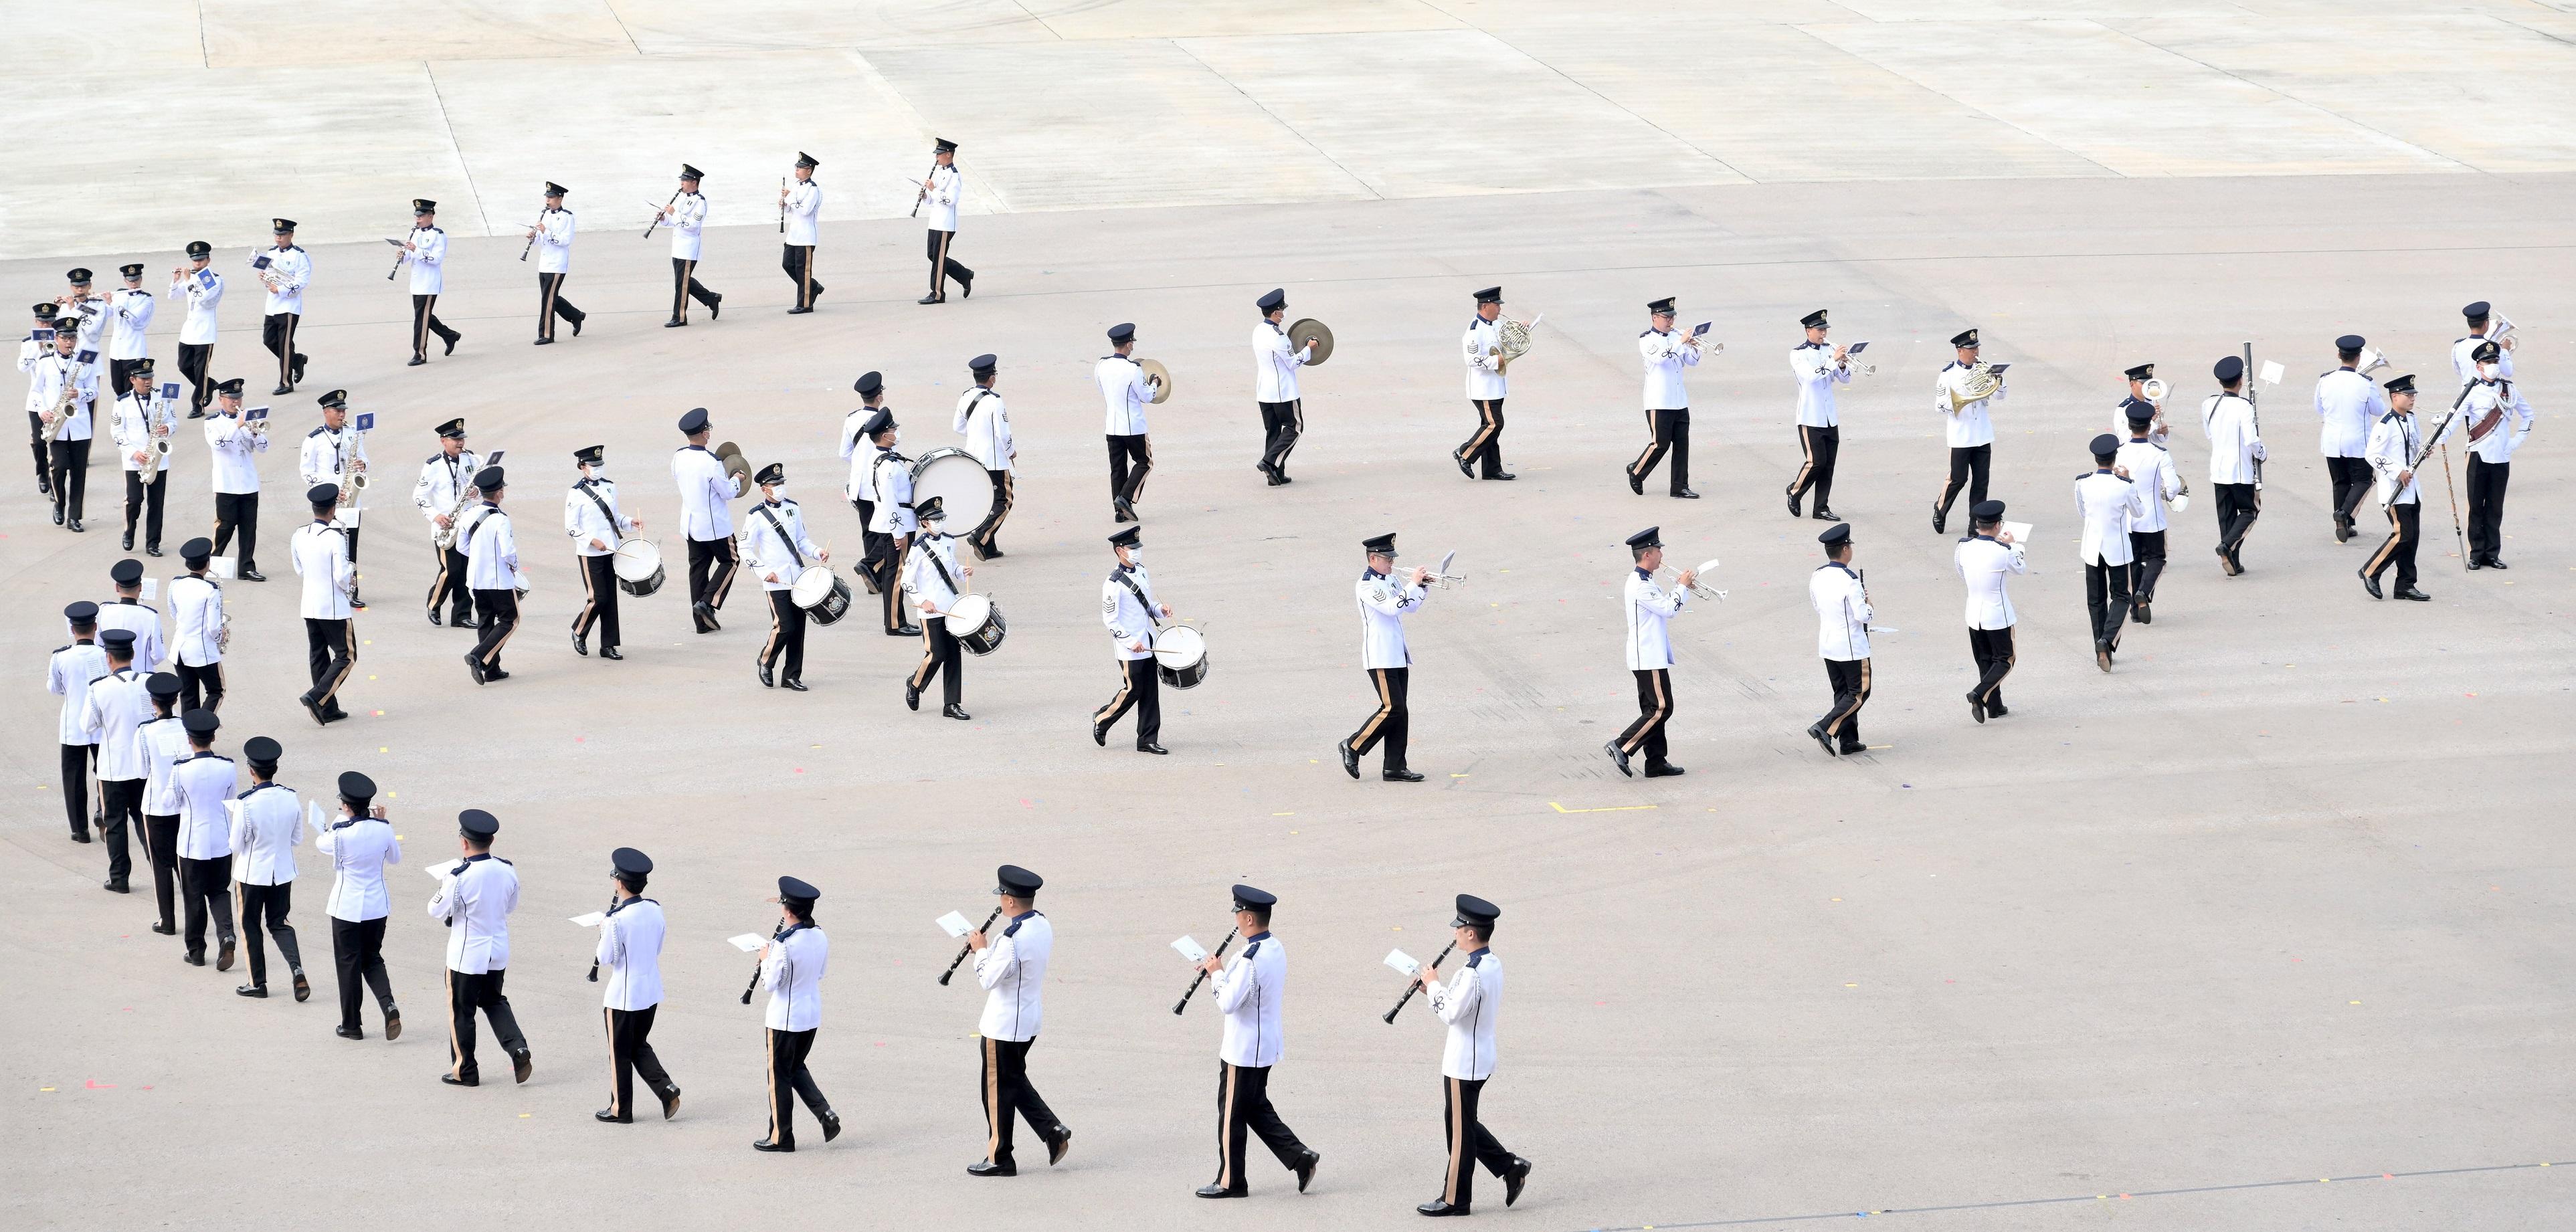 The Security Bureau led the disciplined services, auxiliary services and nine youth groups to hold the "Together We Prosper" Grand Parade by Disciplined Services and Youth Groups for Celebrating the 73rd Anniversary of the Founding of the People’s Republic of China and the 25th Anniversary of the Establishment of the Hong Kong Special Administrative Region at the Fire and Ambulance Services Academy in Tseung Kwan O today (September 24). Photo shows music performance by the Hong Kong Police Band.